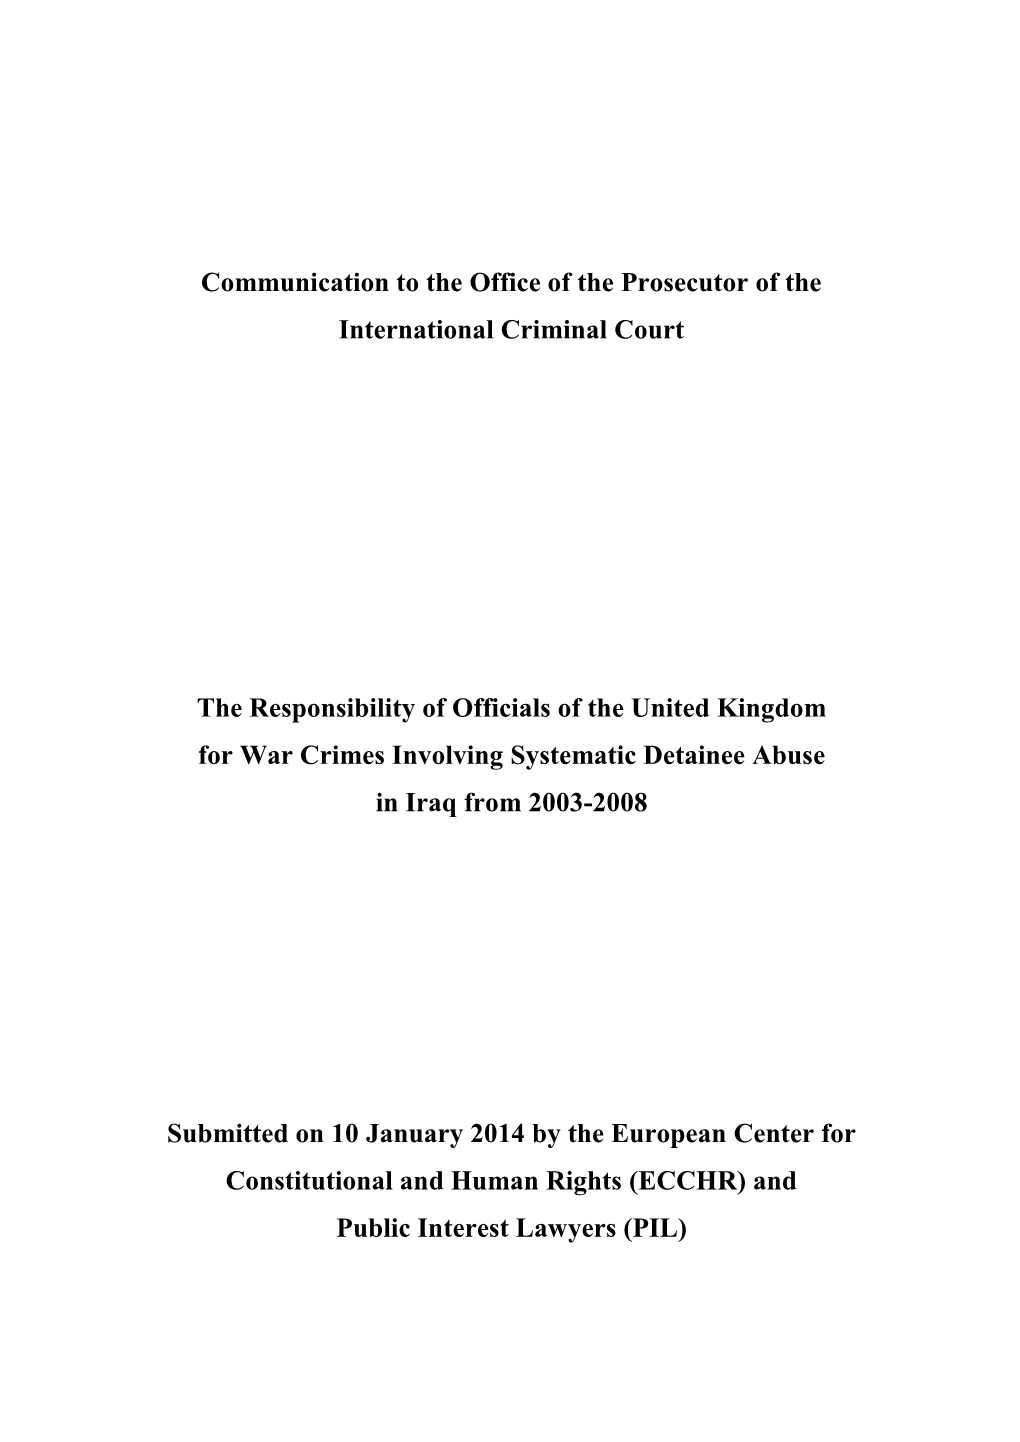 Communication to the Office of the Prosecutor of the International Criminal Court